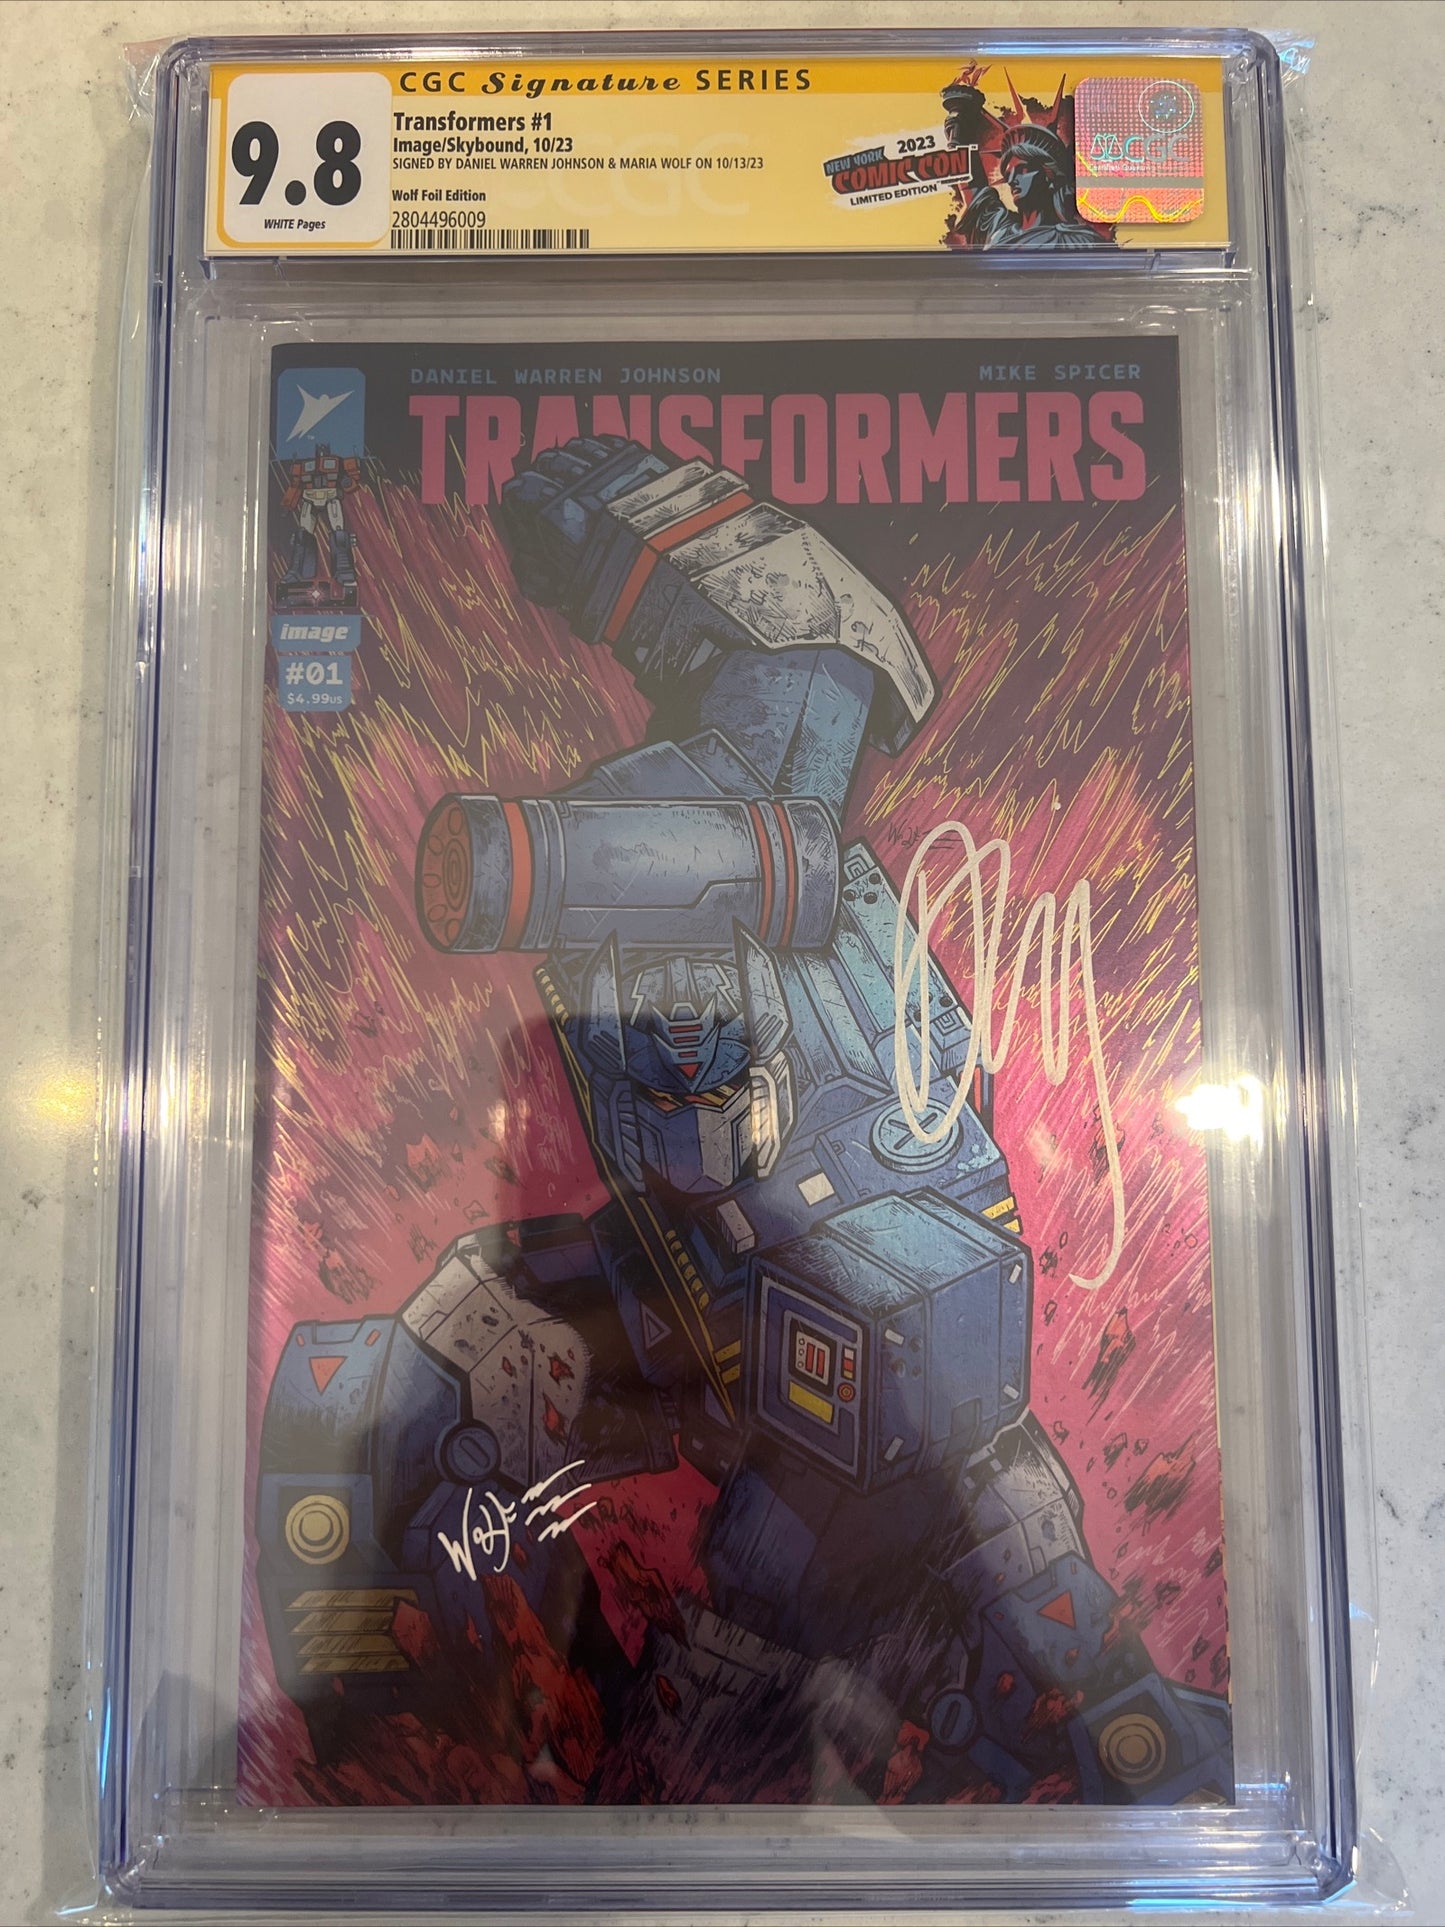 Transformers #1 (Image/Skybound) CGC SS 9.8 (Maria Wolf Foil Cover) signed by Daniel Warren Johnson and Maria Wolf